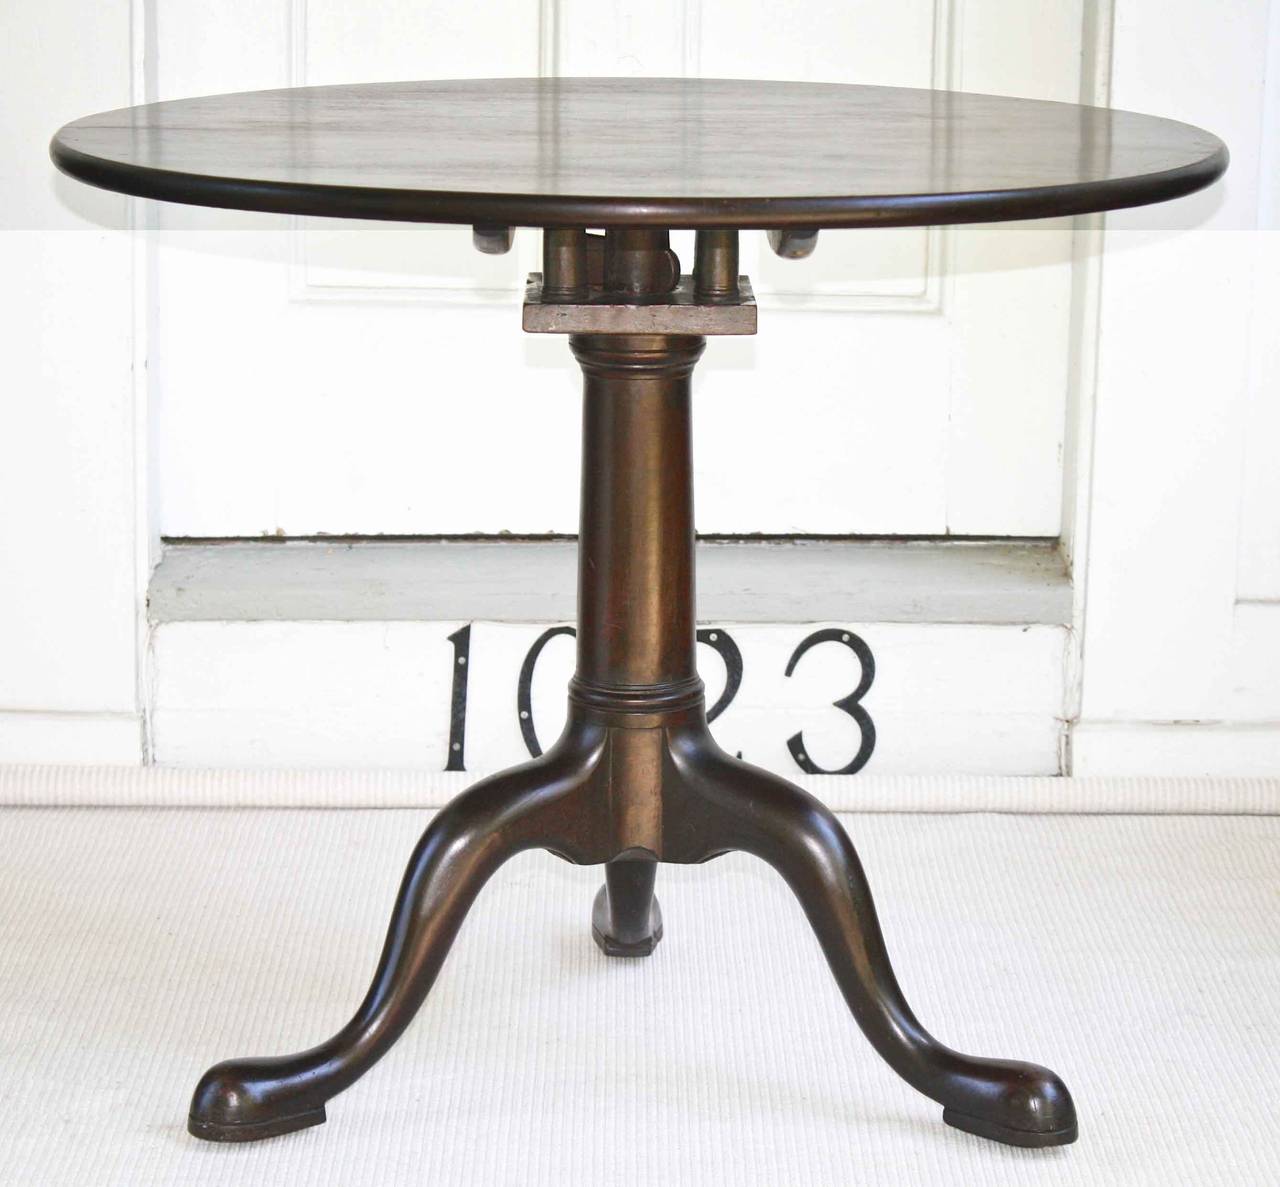 An American Southern Queen Anne snake footed Carolinian walnut tilt-top tea table with 'bird cage', to permit swiveling for graceful service.  A plain-edged single board top with cannon shaft pedestal, its three snake feet have been hollow-carved to